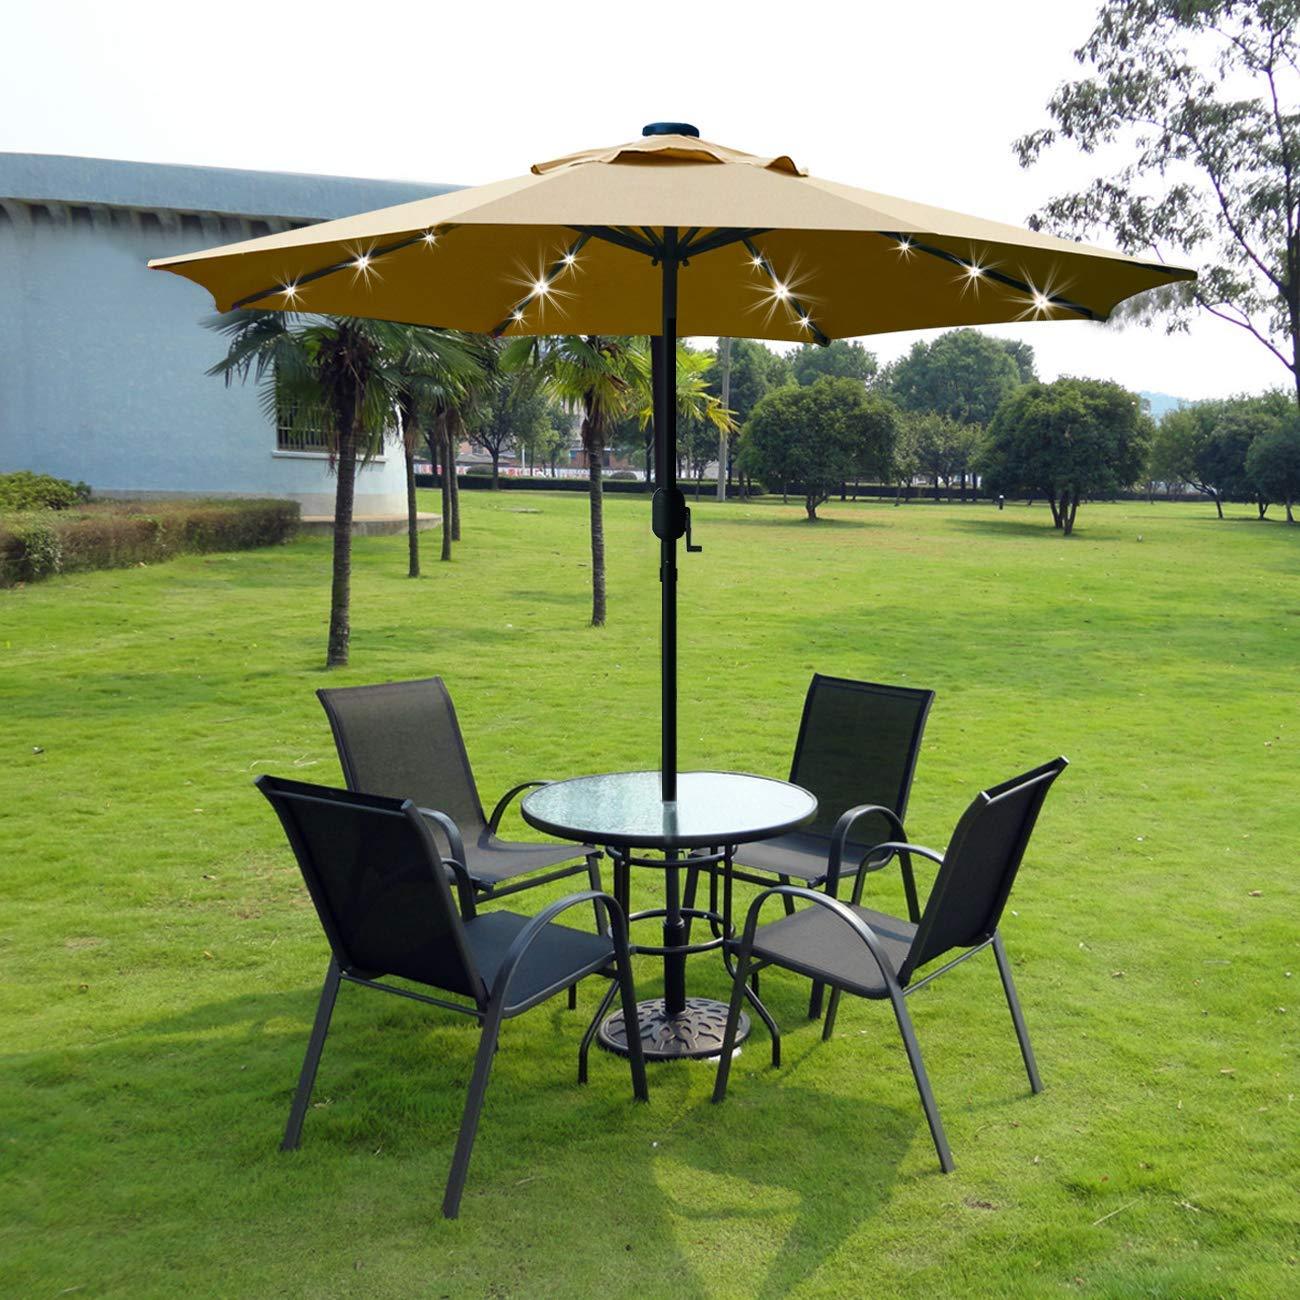 Sunnyglade 9' Solar LED Lighted Patio Umbrella with 8 Ribs/Tilt Adjustment and Crank Lift System (Light Tan) - CookCave